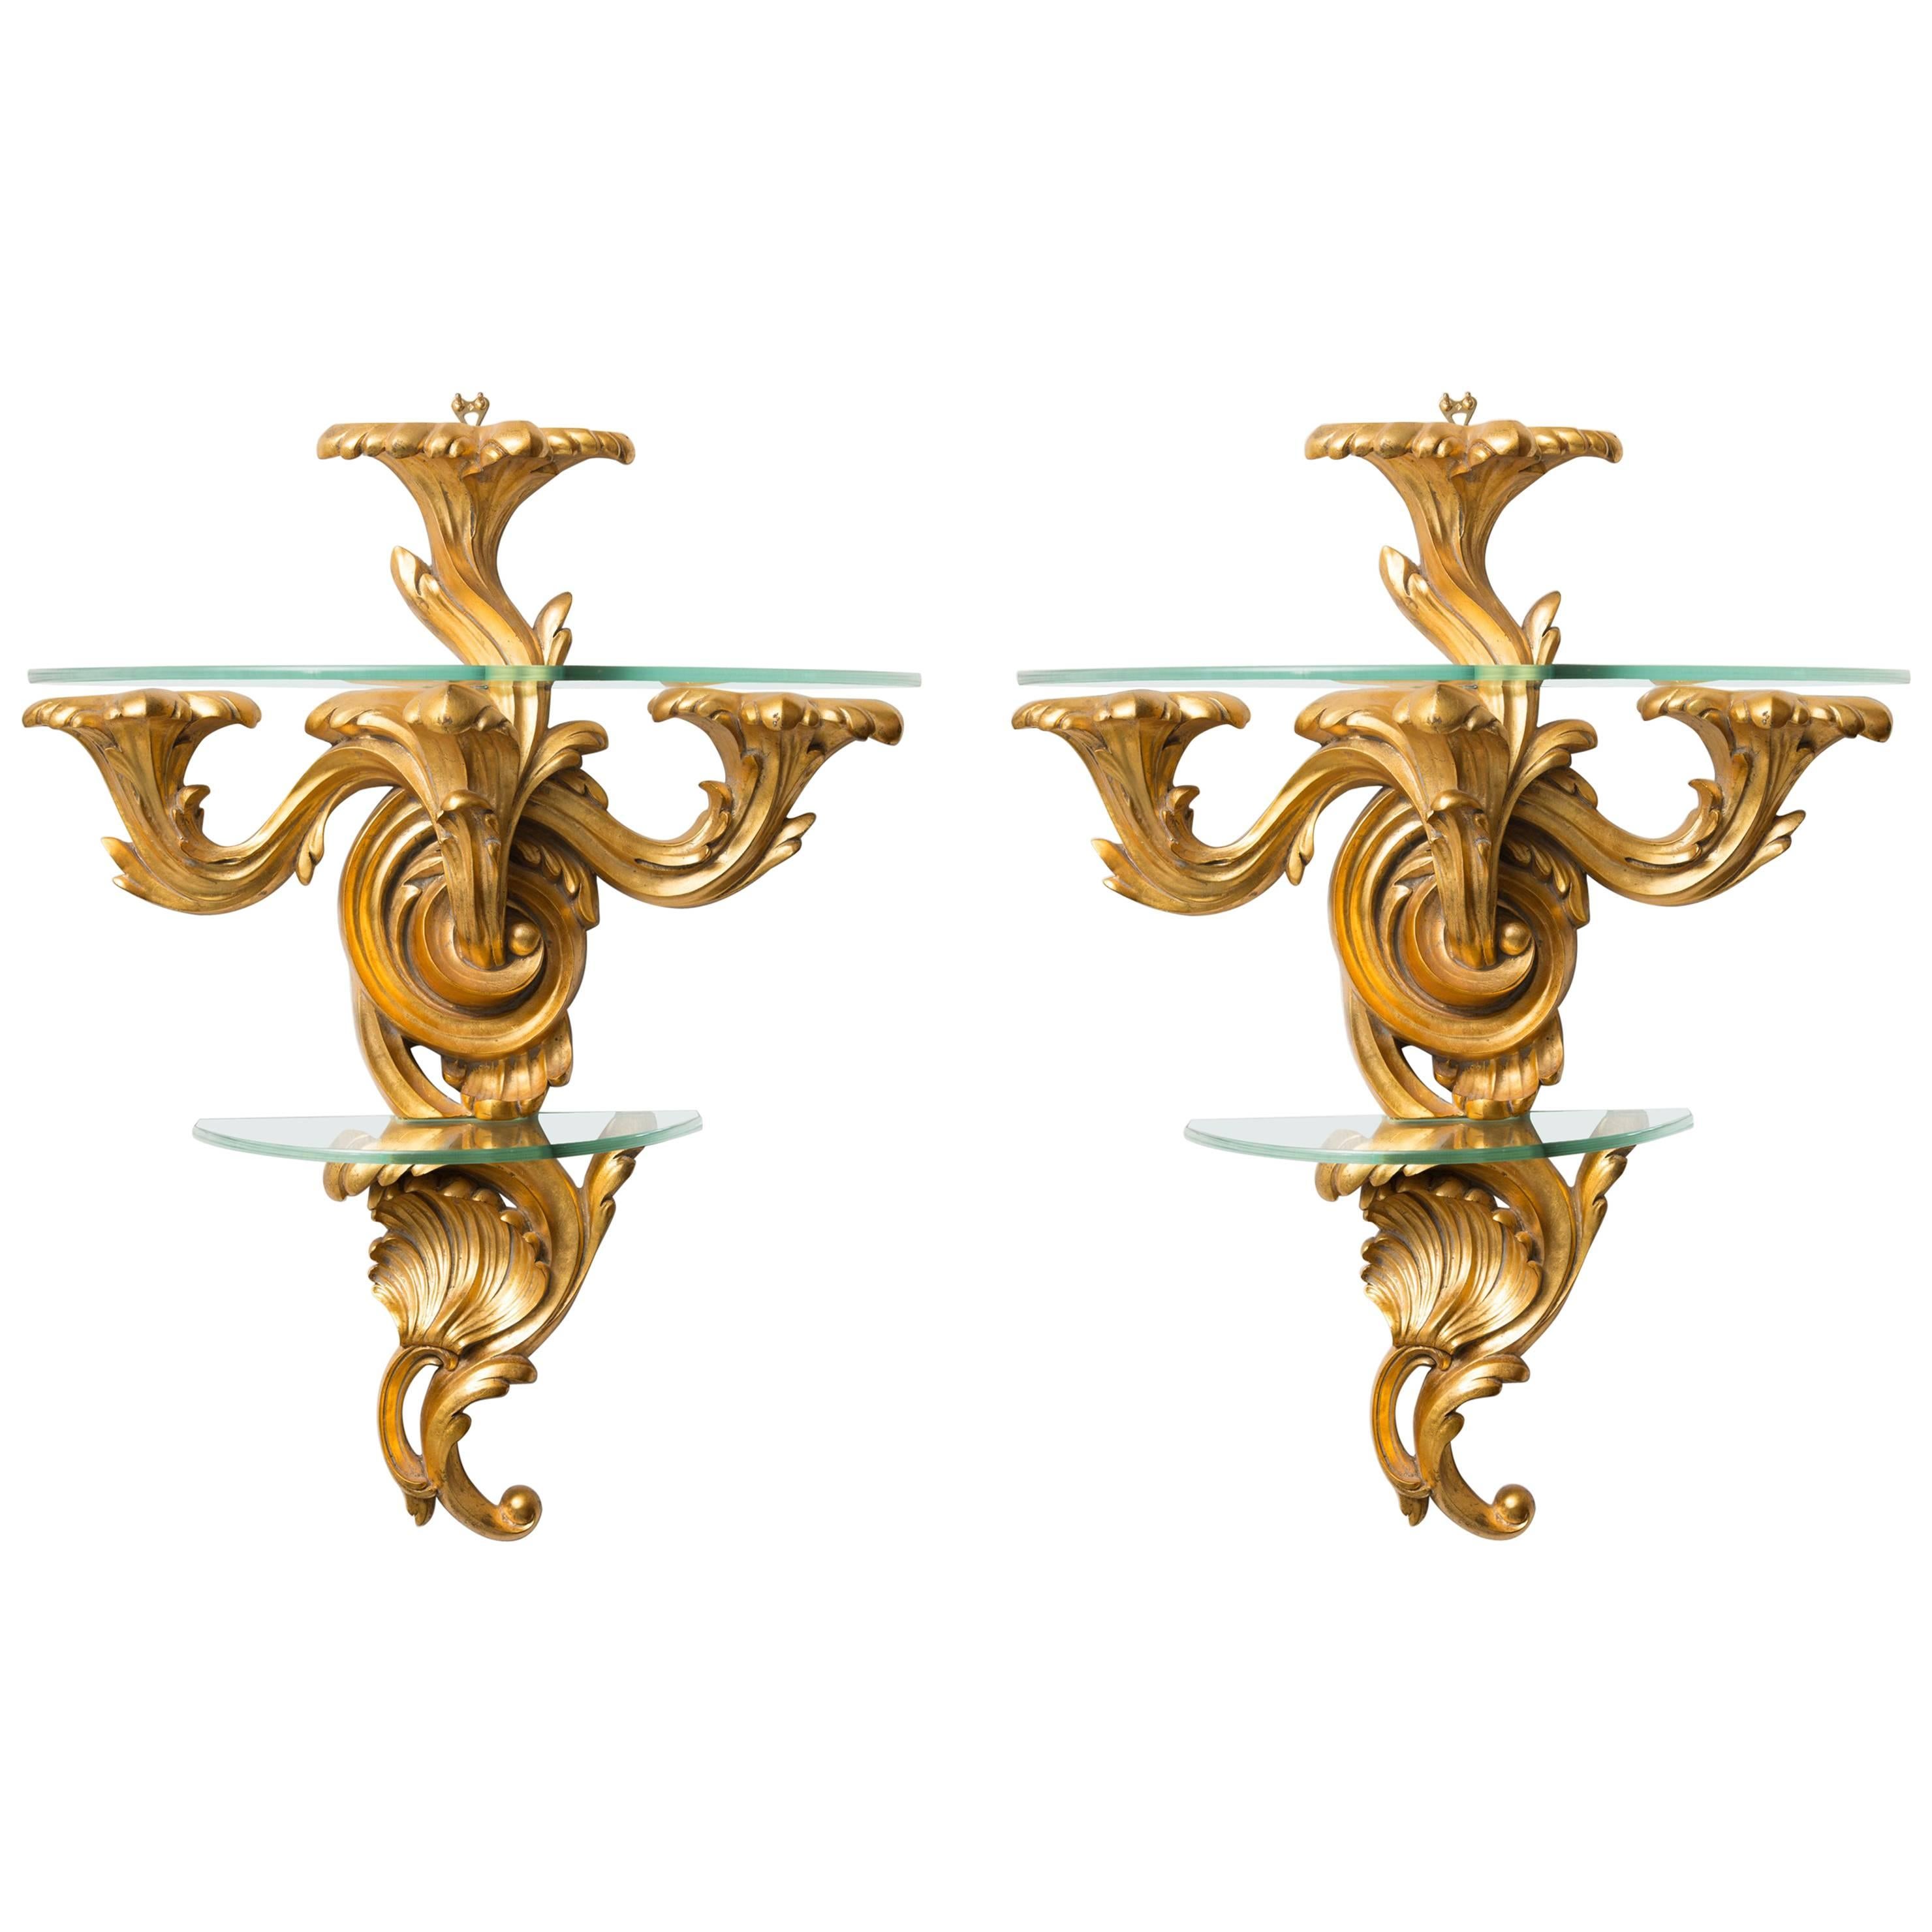 Pair of Gilt Rococo Style Brackets with Glass Shelves